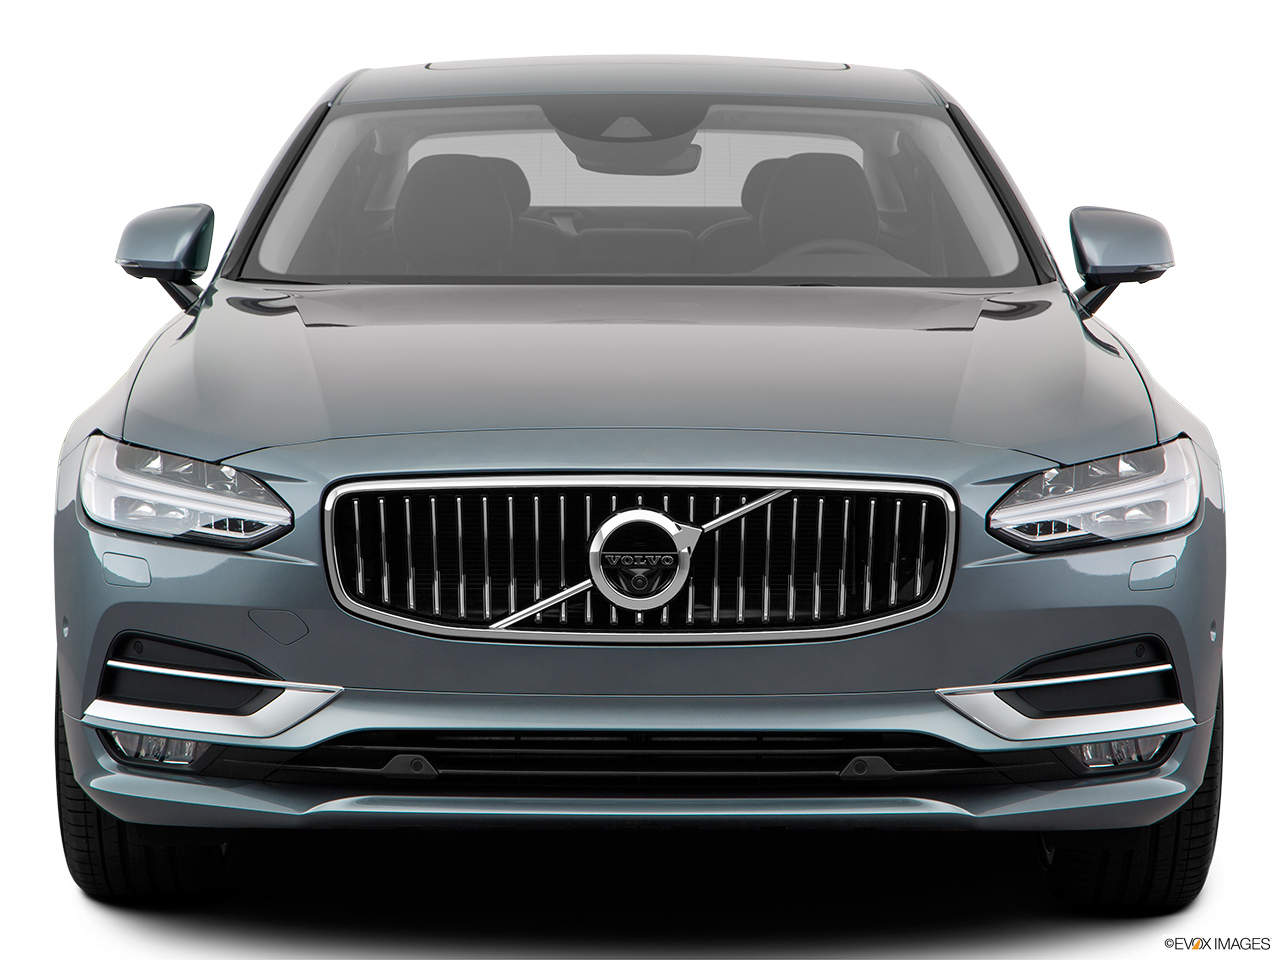 2020 Volvo S90 T6 Inscription Low/wide front. 